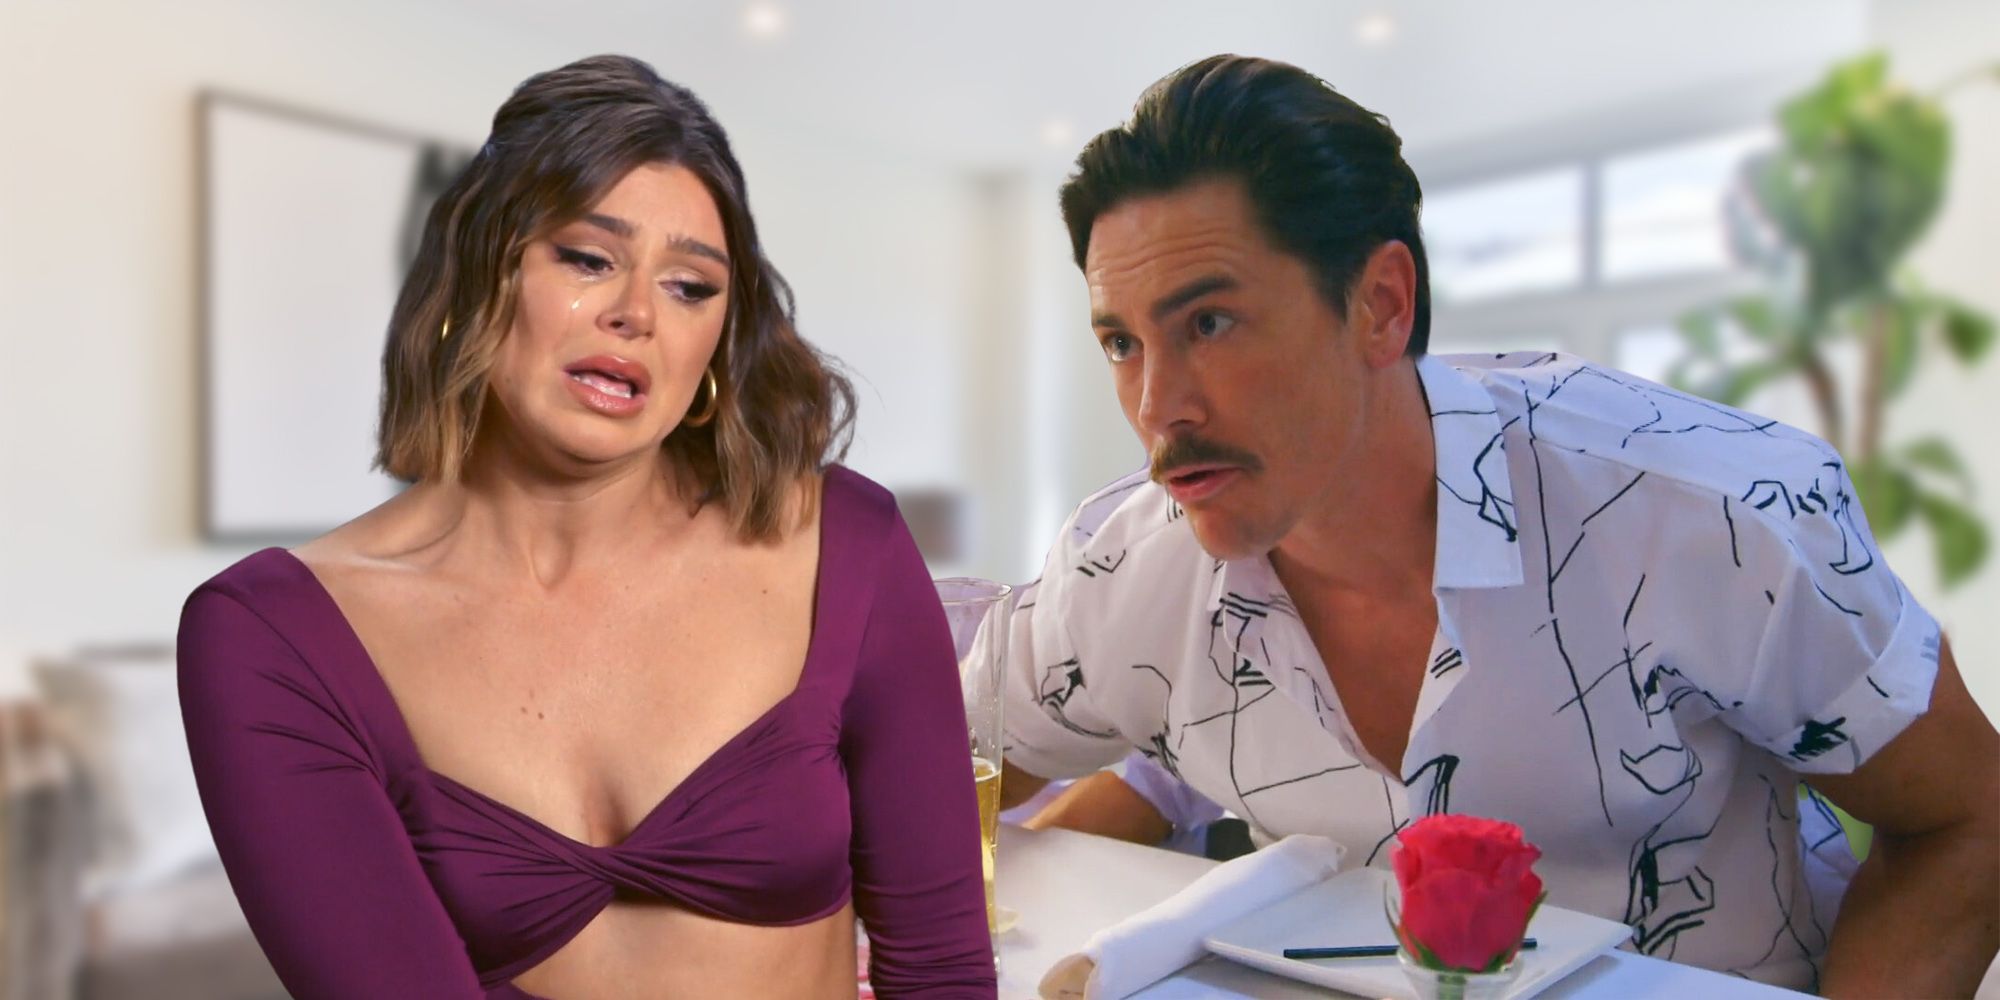 Vanderpump Rules' Raquel Leviss crying and Tom Sandoval looking serious